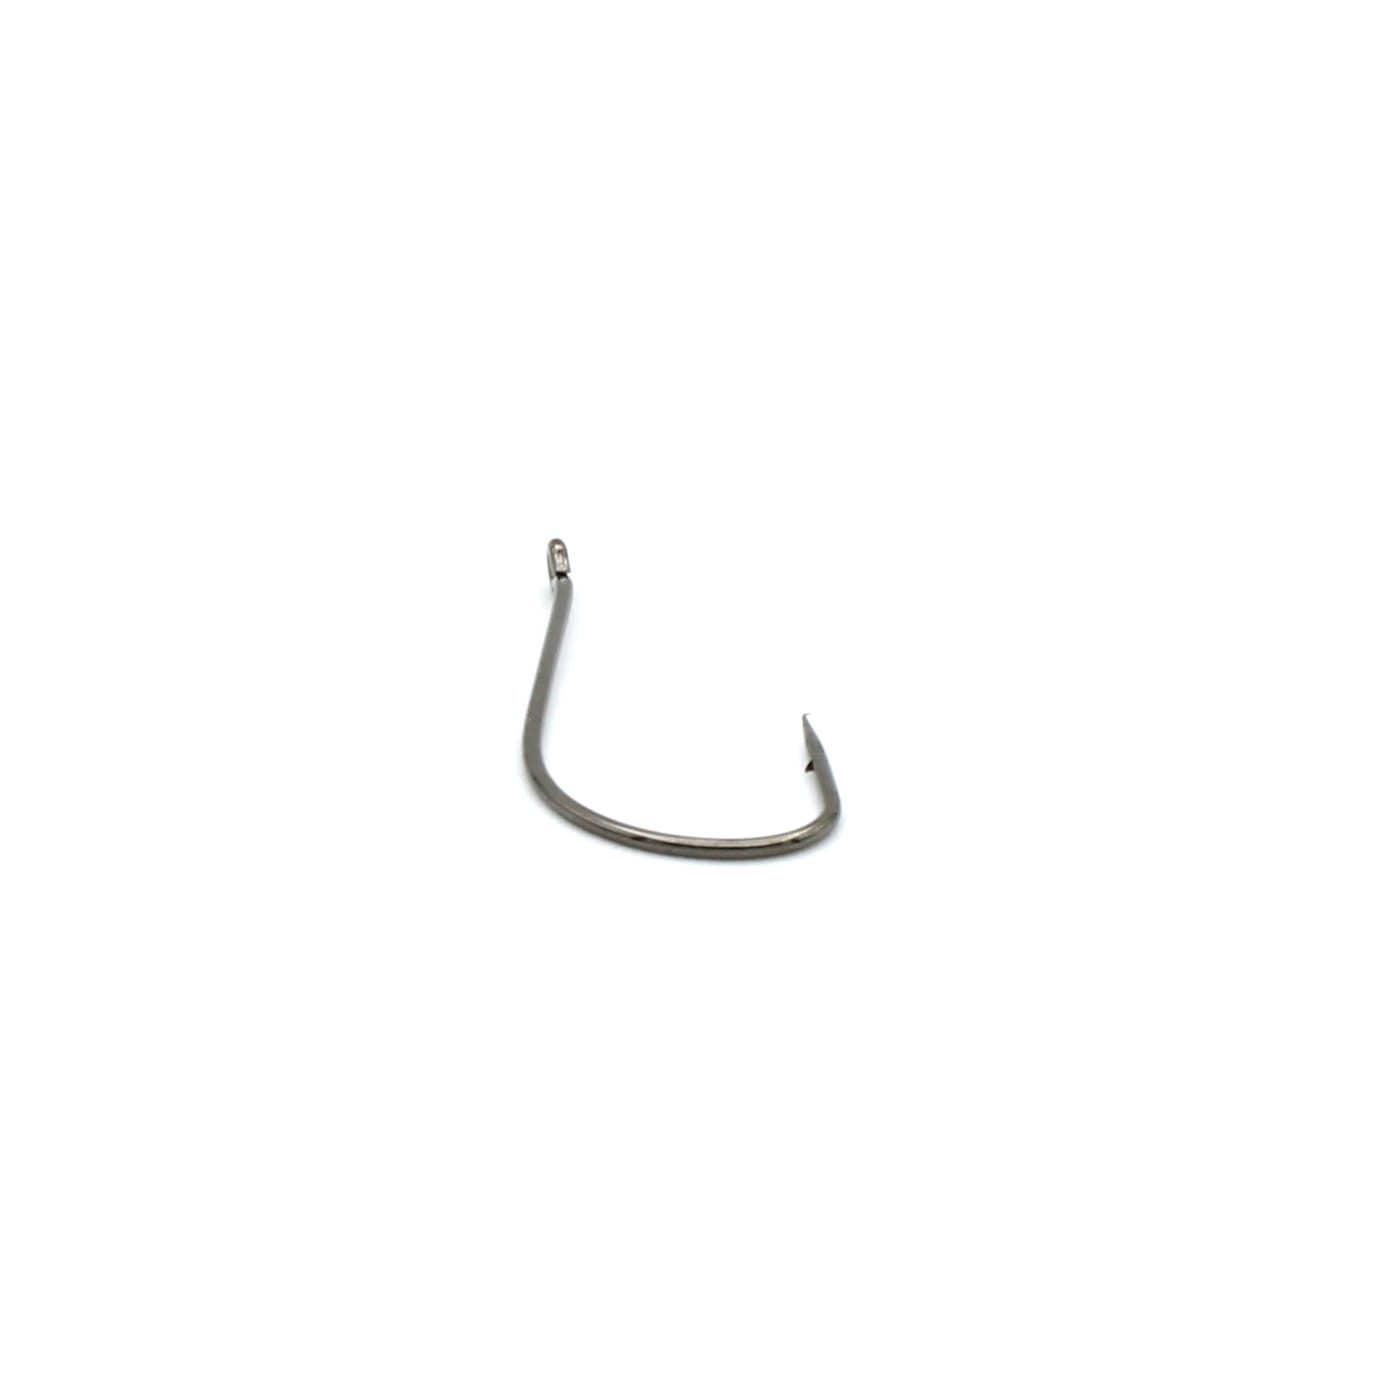 Owner Mosquito Light Hook - Bait Finesse Empire